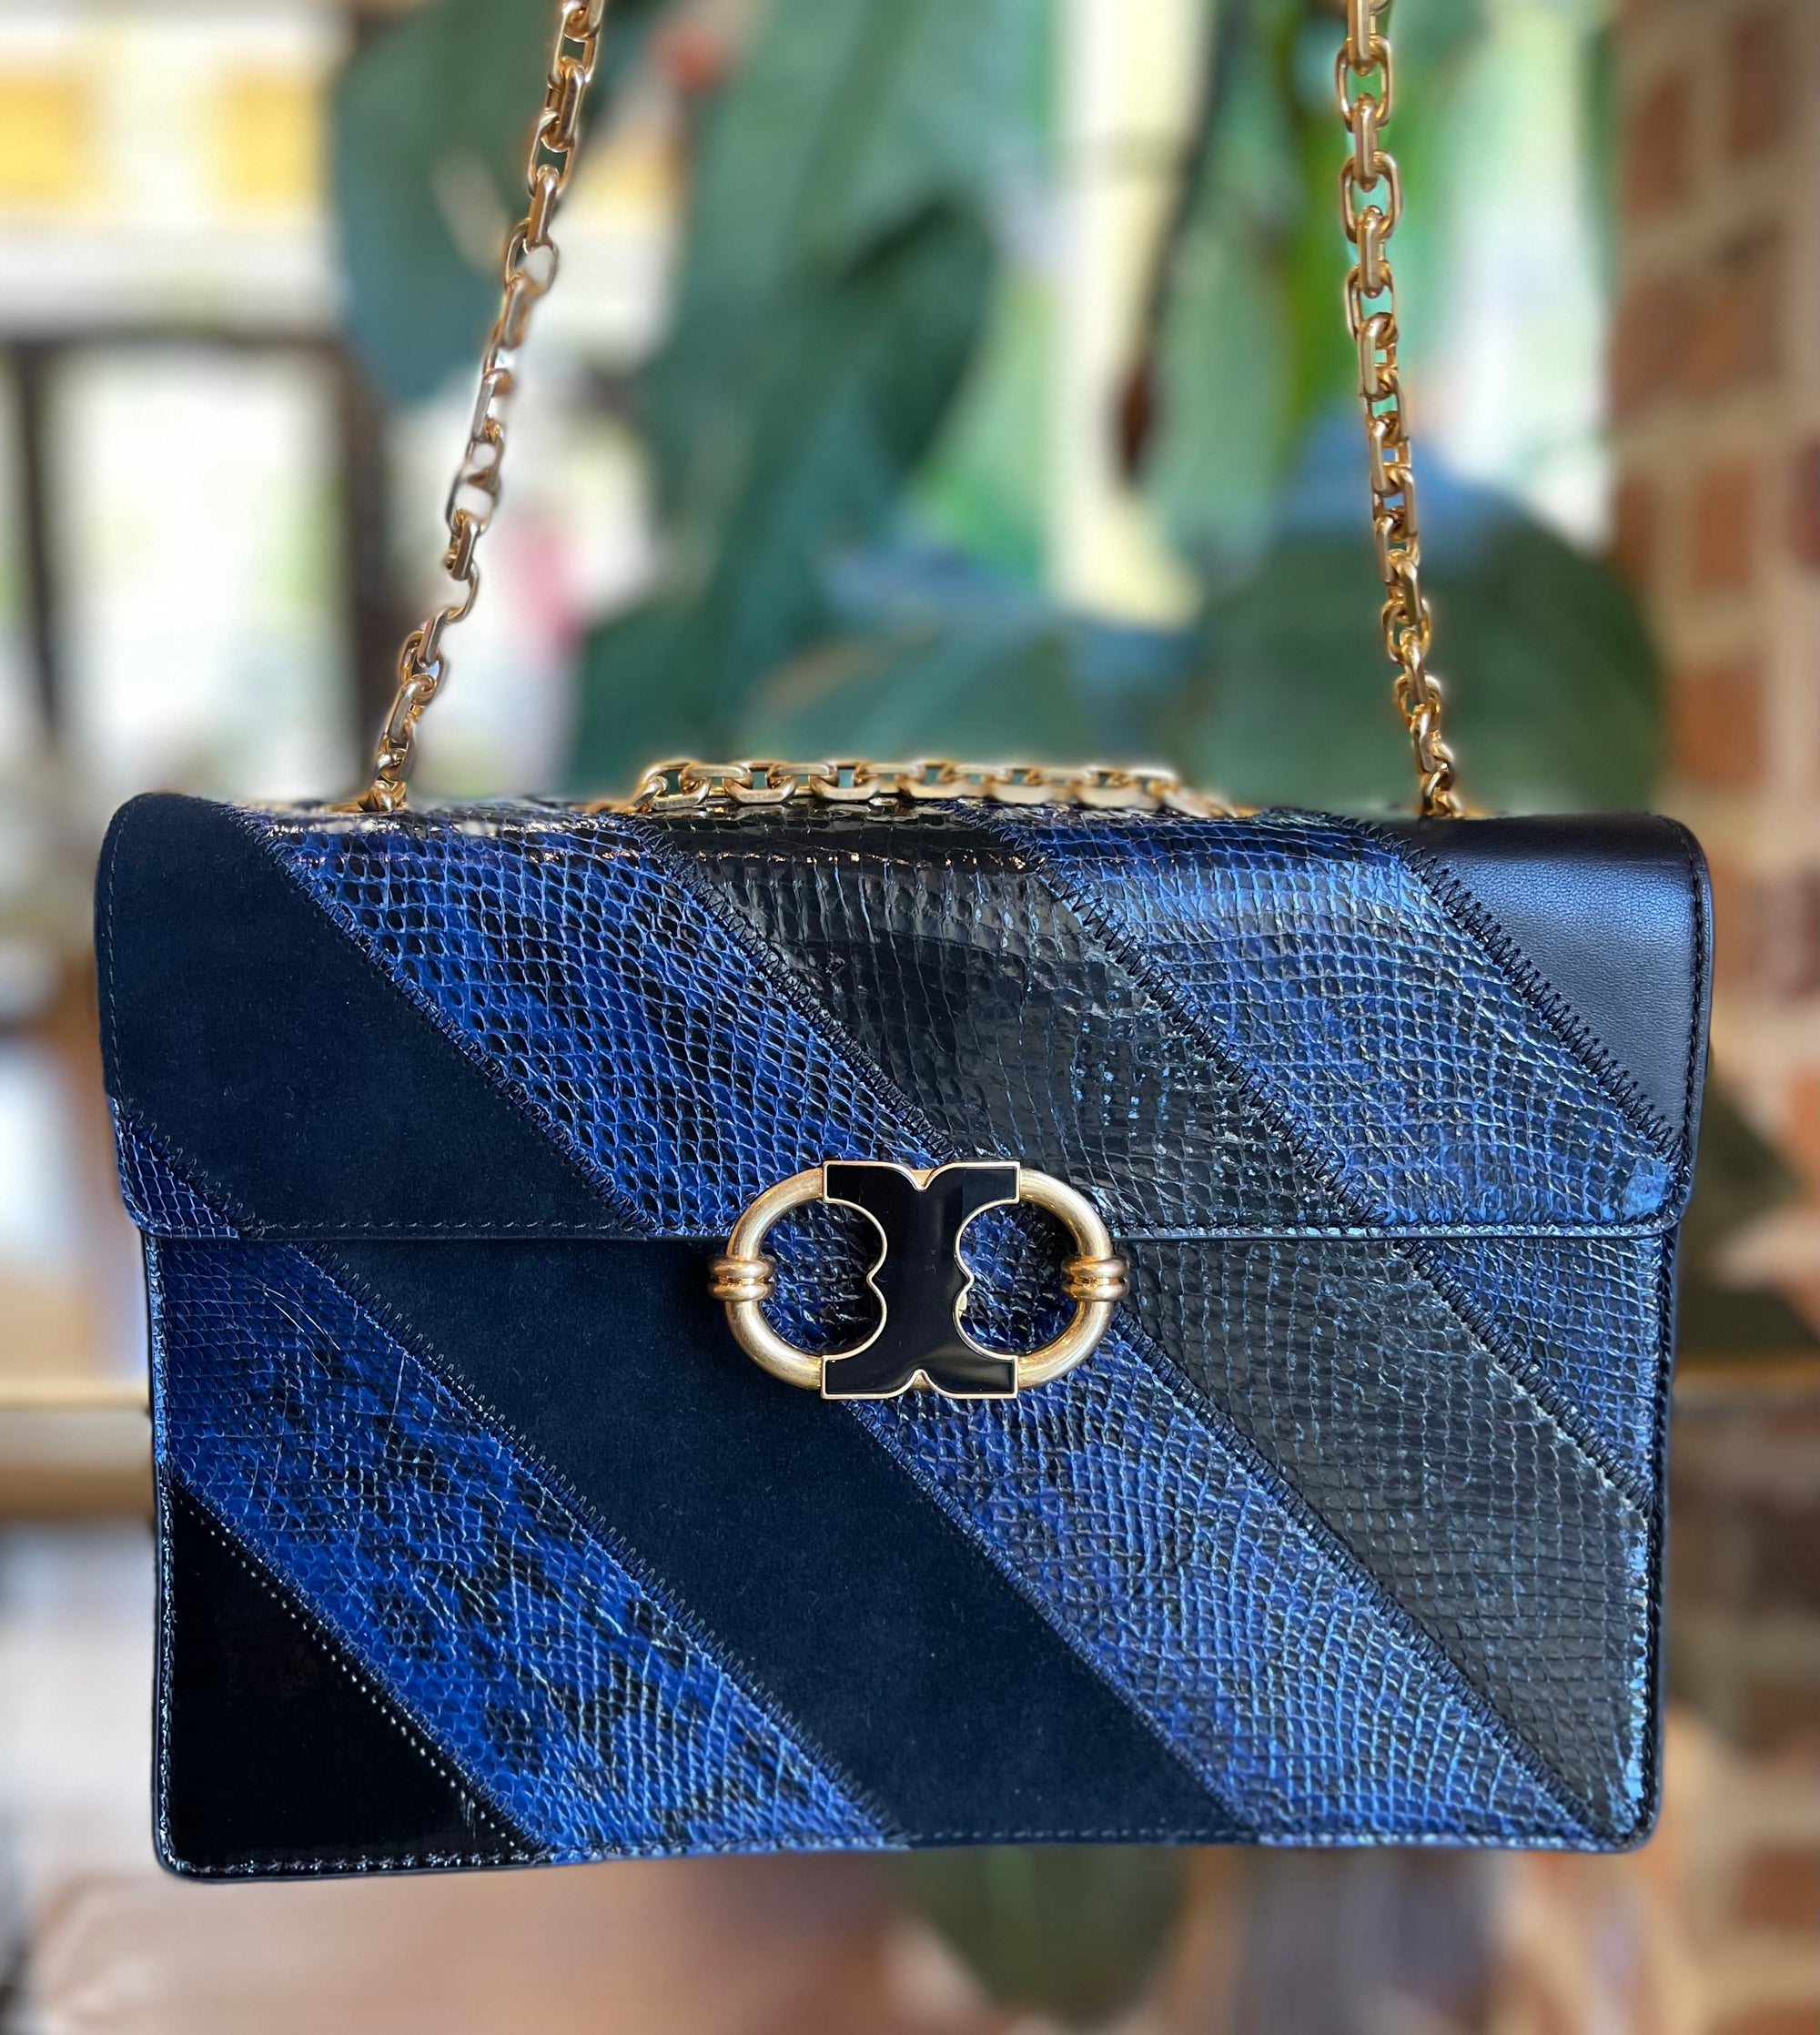 TORY BURCH Blue and Black Patchwork Flap